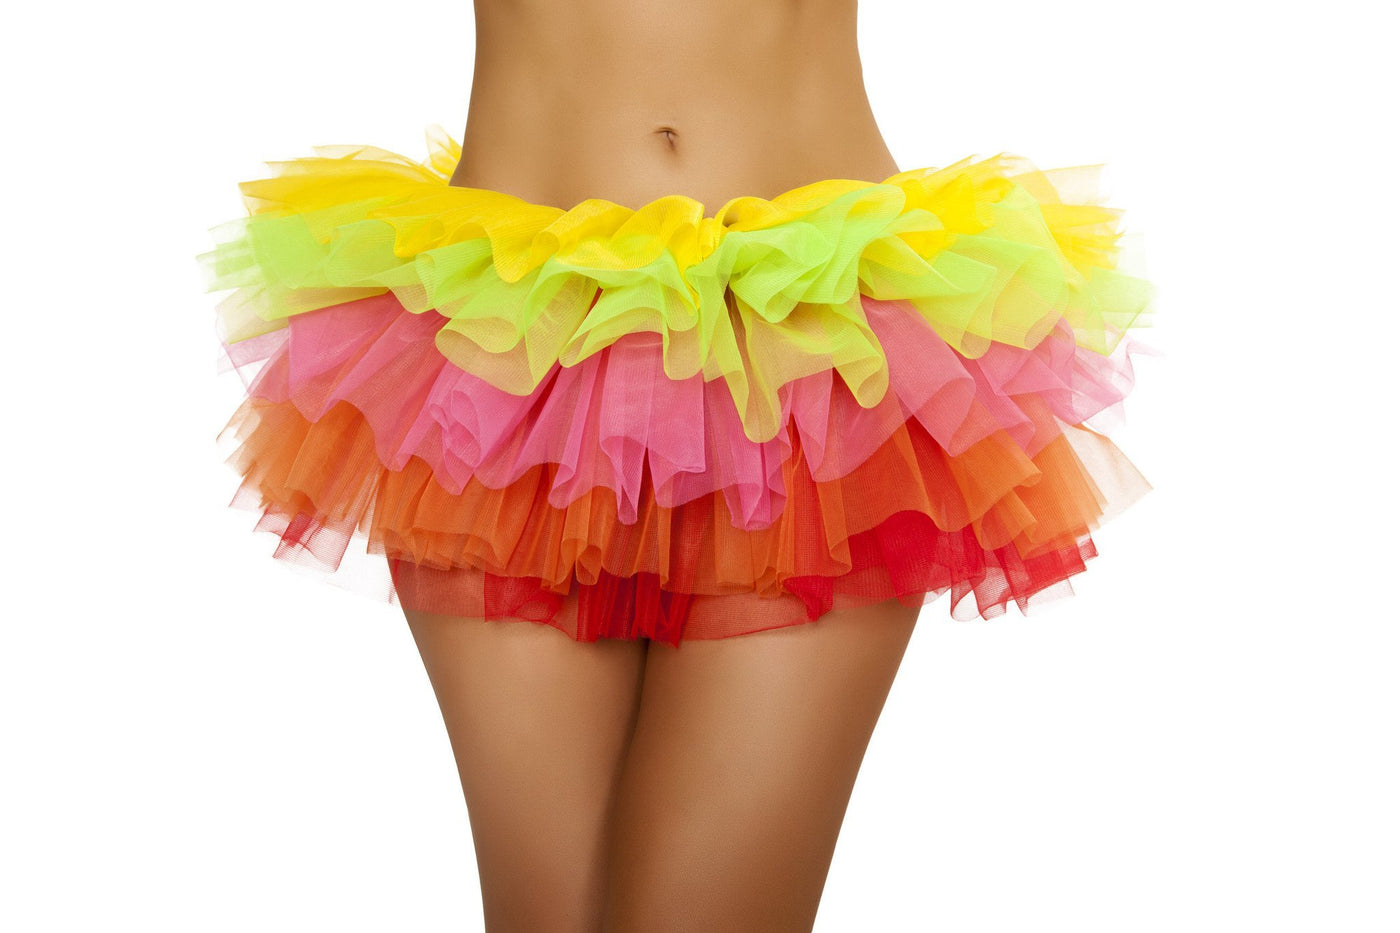 Buy Fluffy Mini Petticoat from RomaRetailShop for 7.99 with Same Day Shipping Designed by Roma Costume 4457-Rainbow-O/S